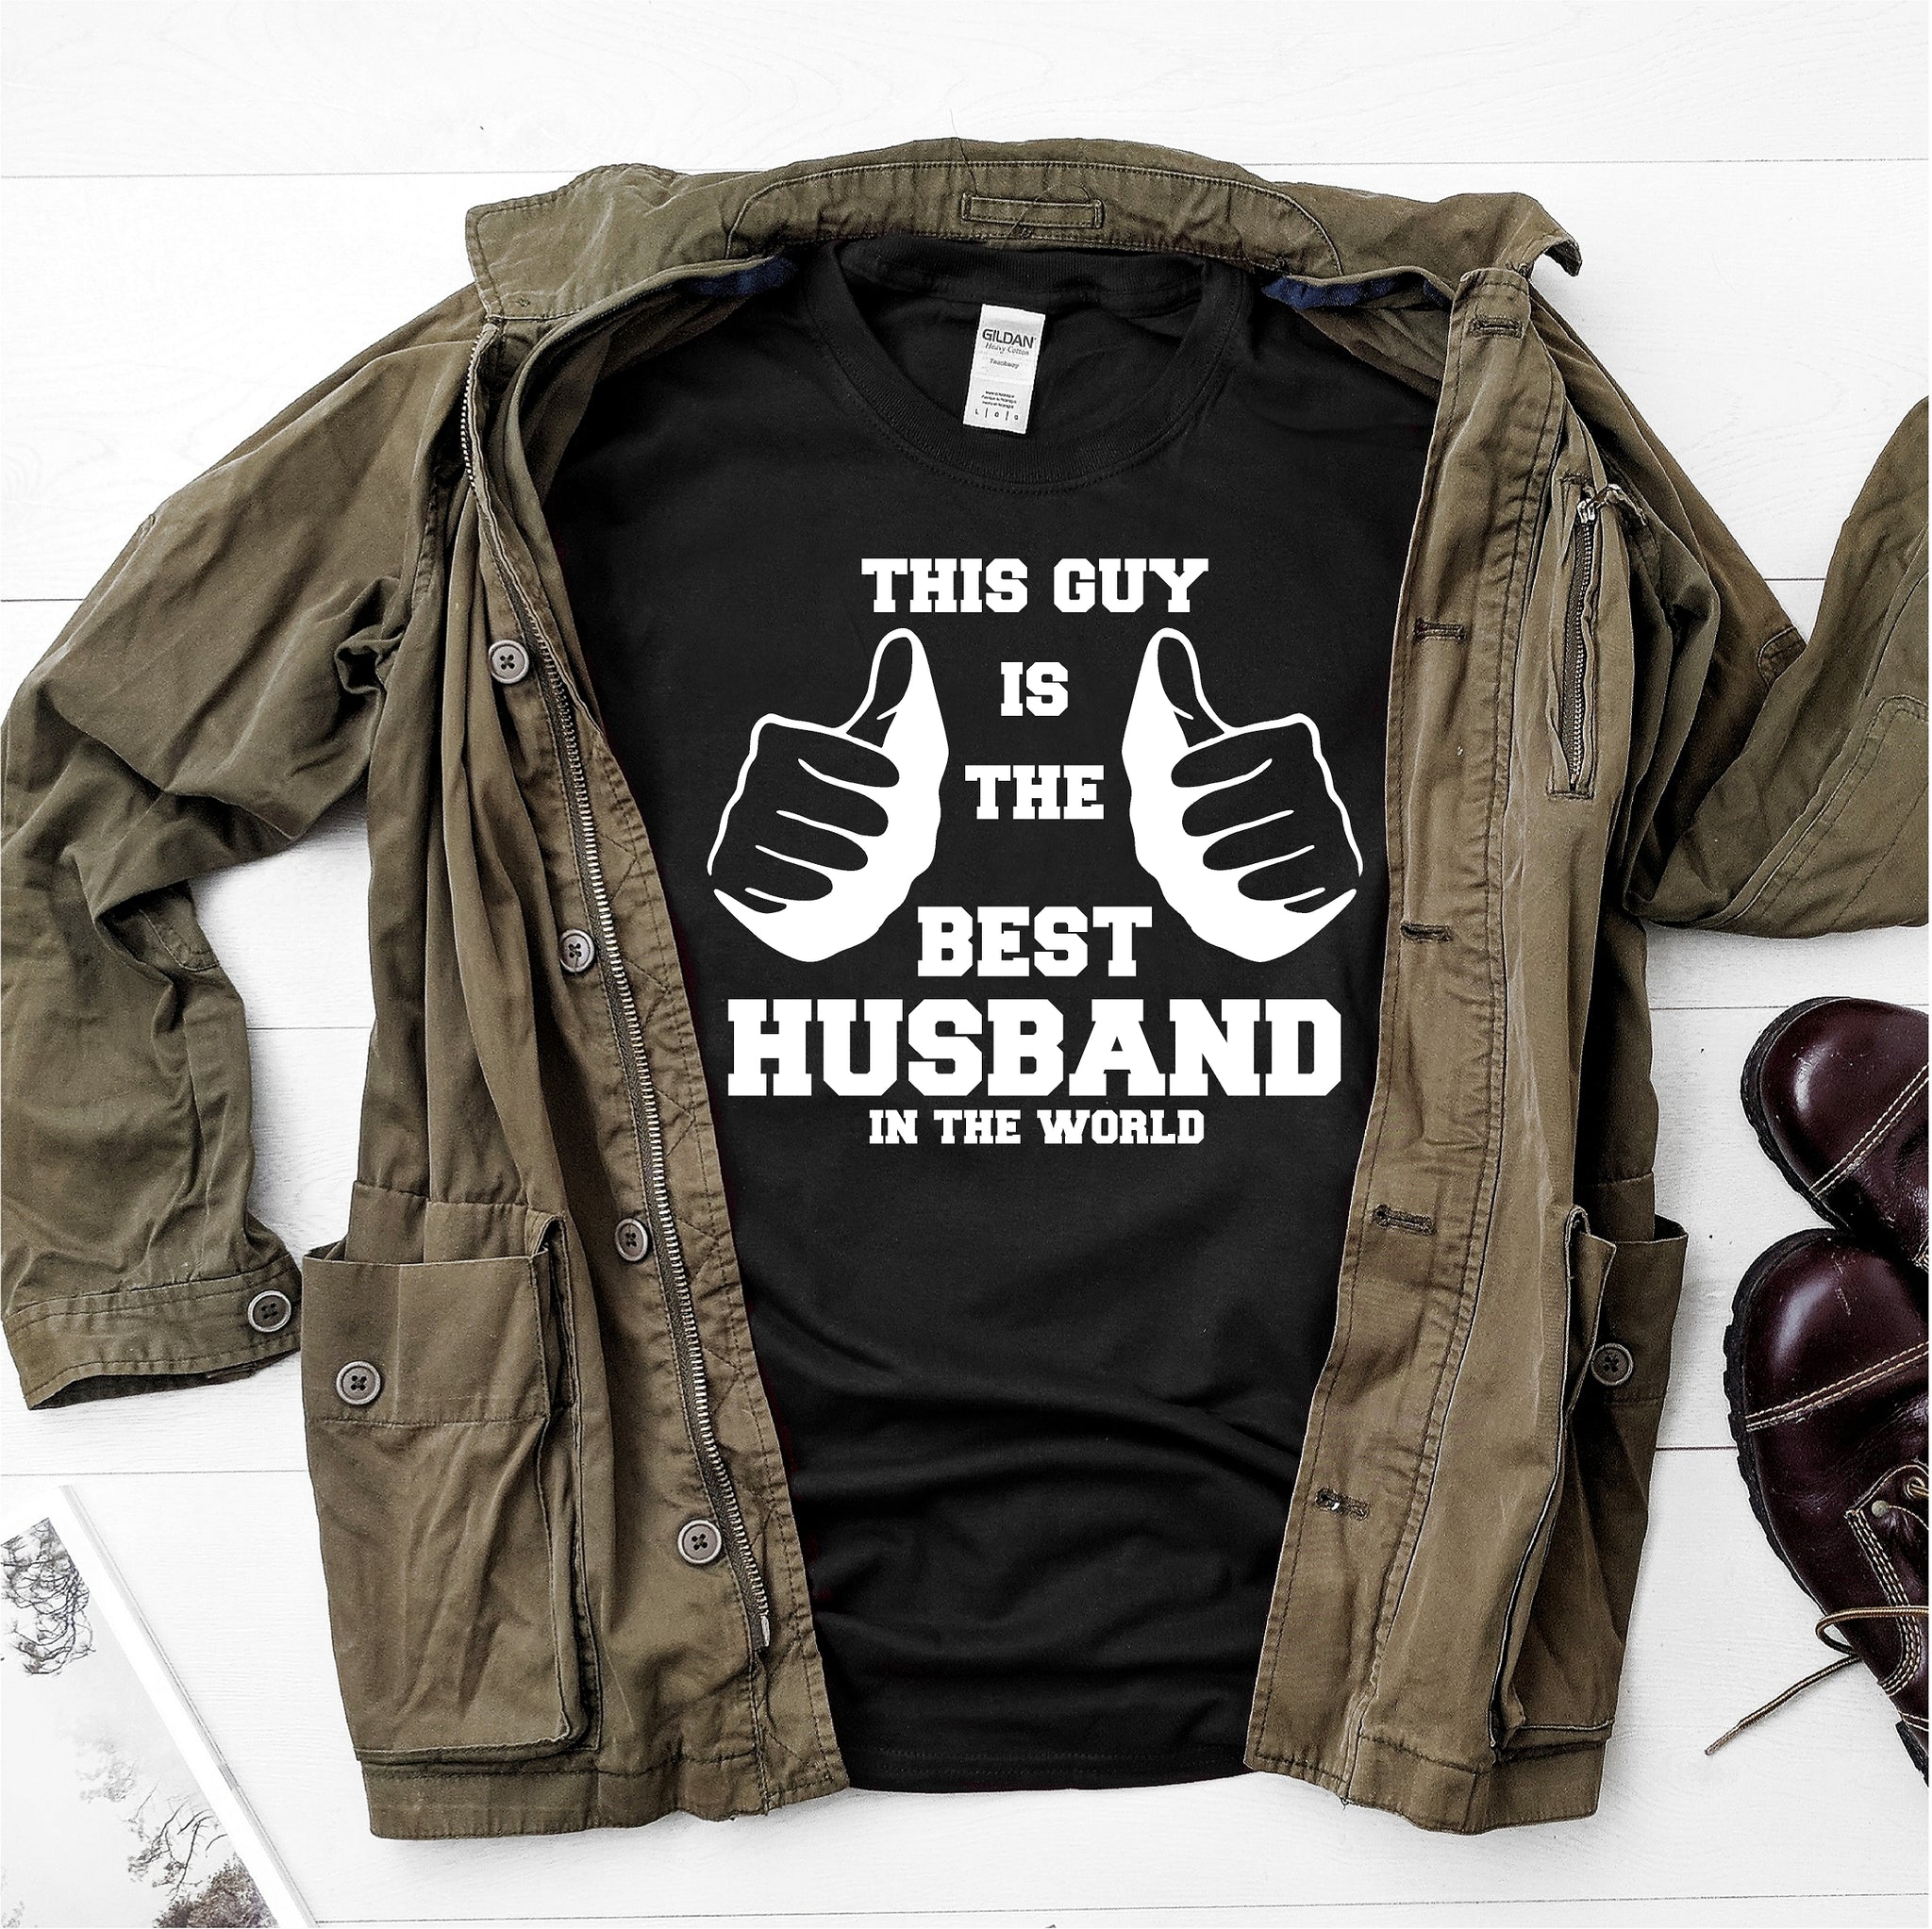 This guy is the best husband in the world- Ultra Cotton Short Sleeve T-Shirt - DFHM50